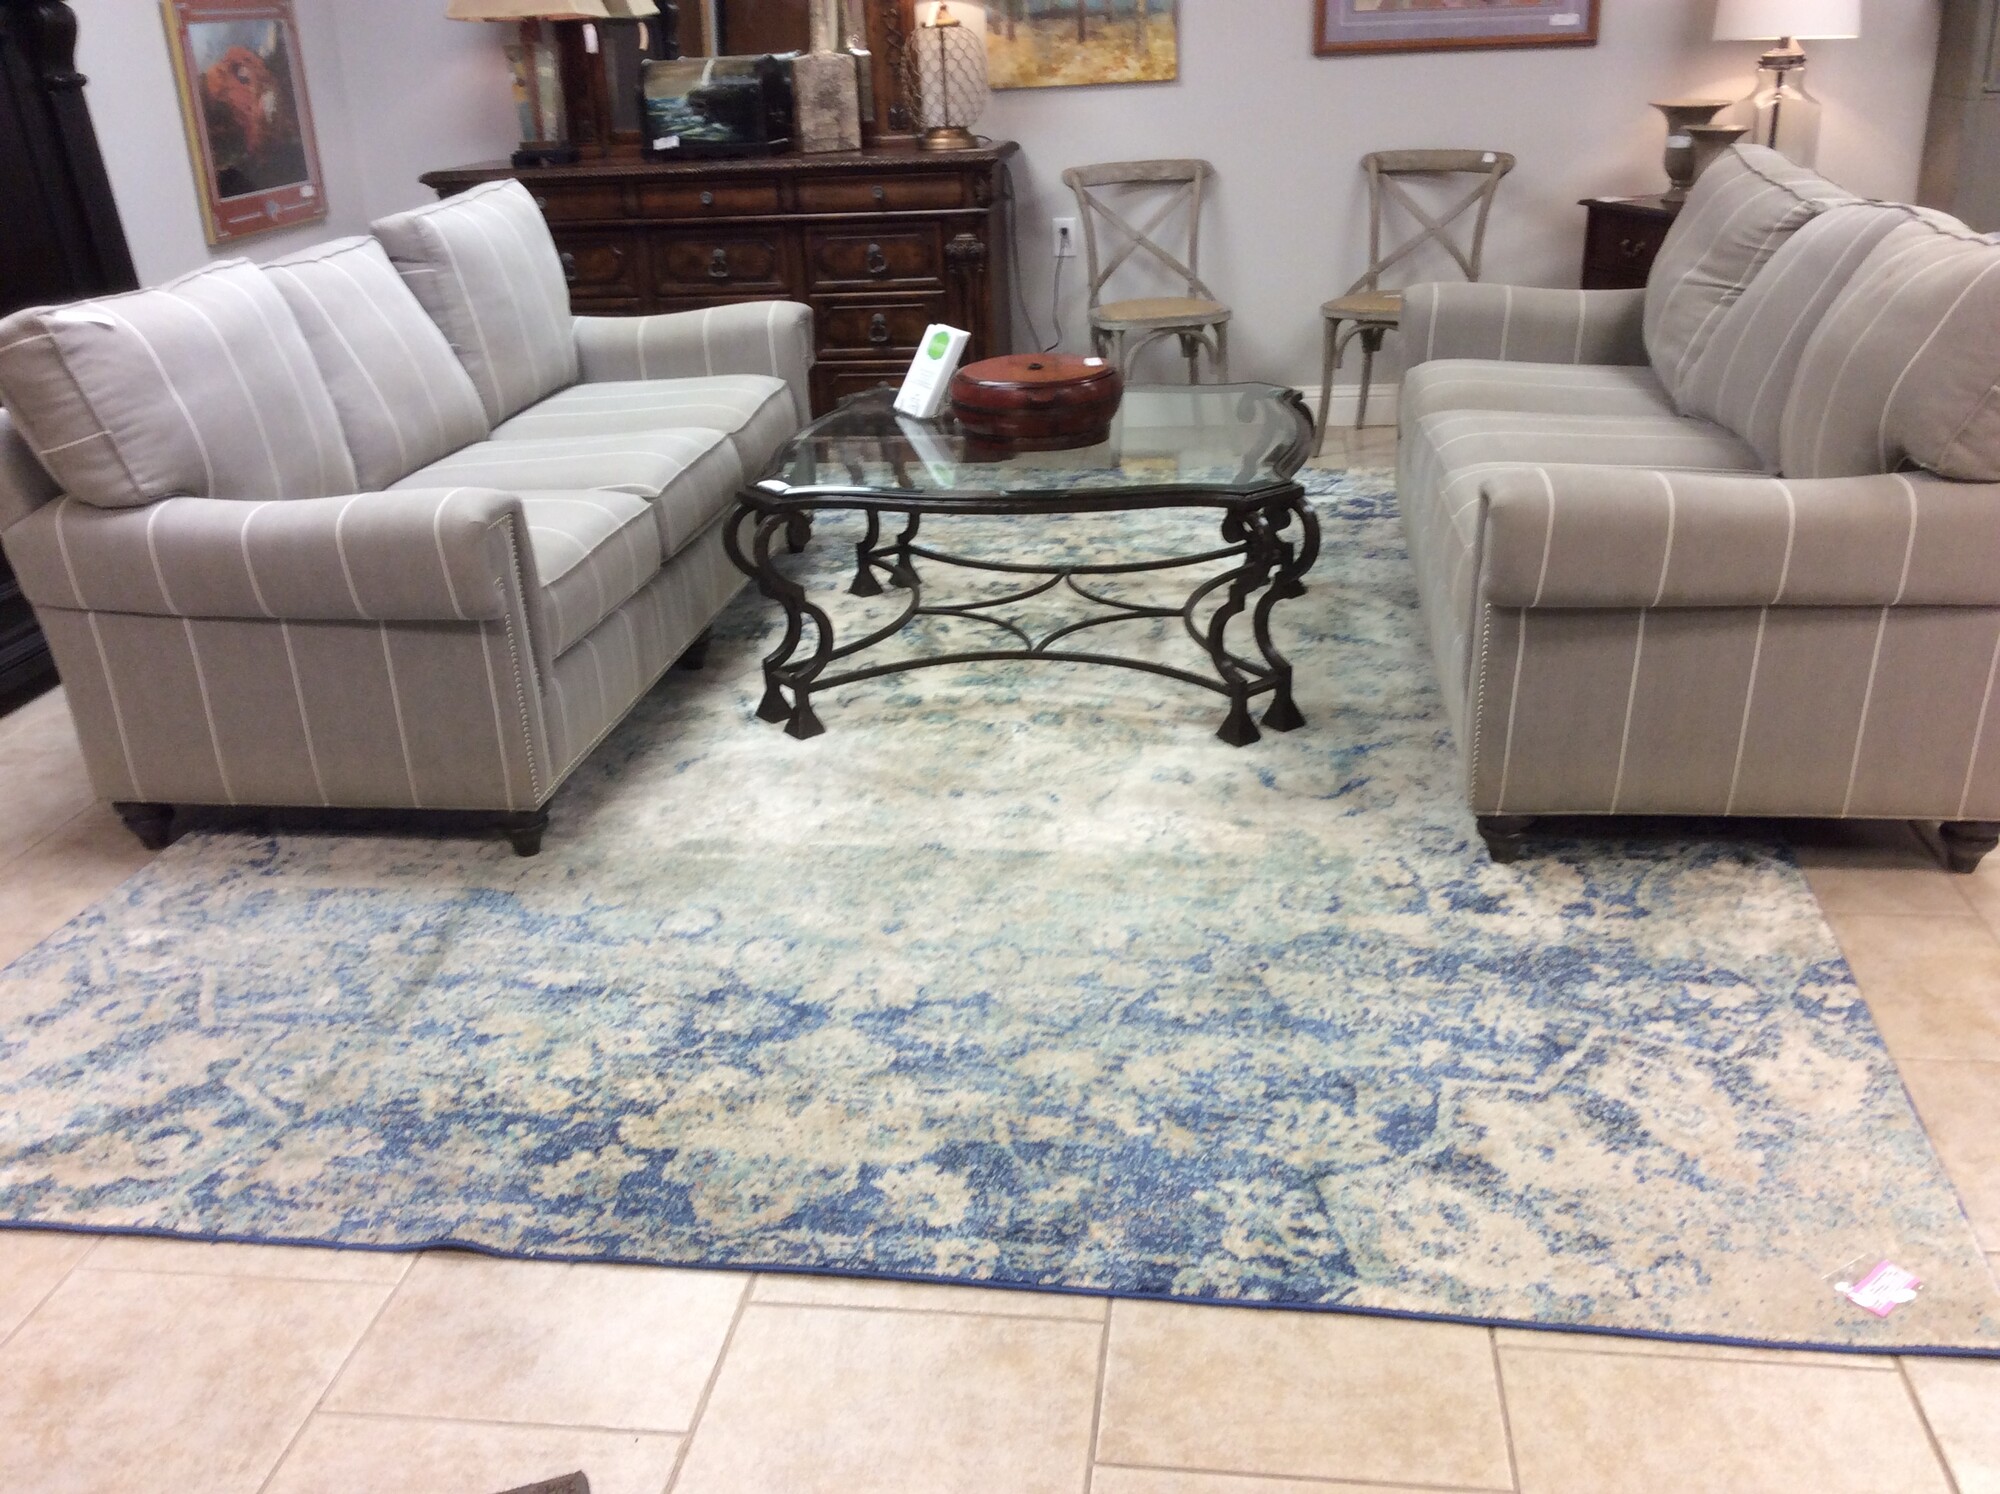 This is a Blue & Ivory Polyester Anastasia Collection Rug. This Rug is made by Loloi Brand.